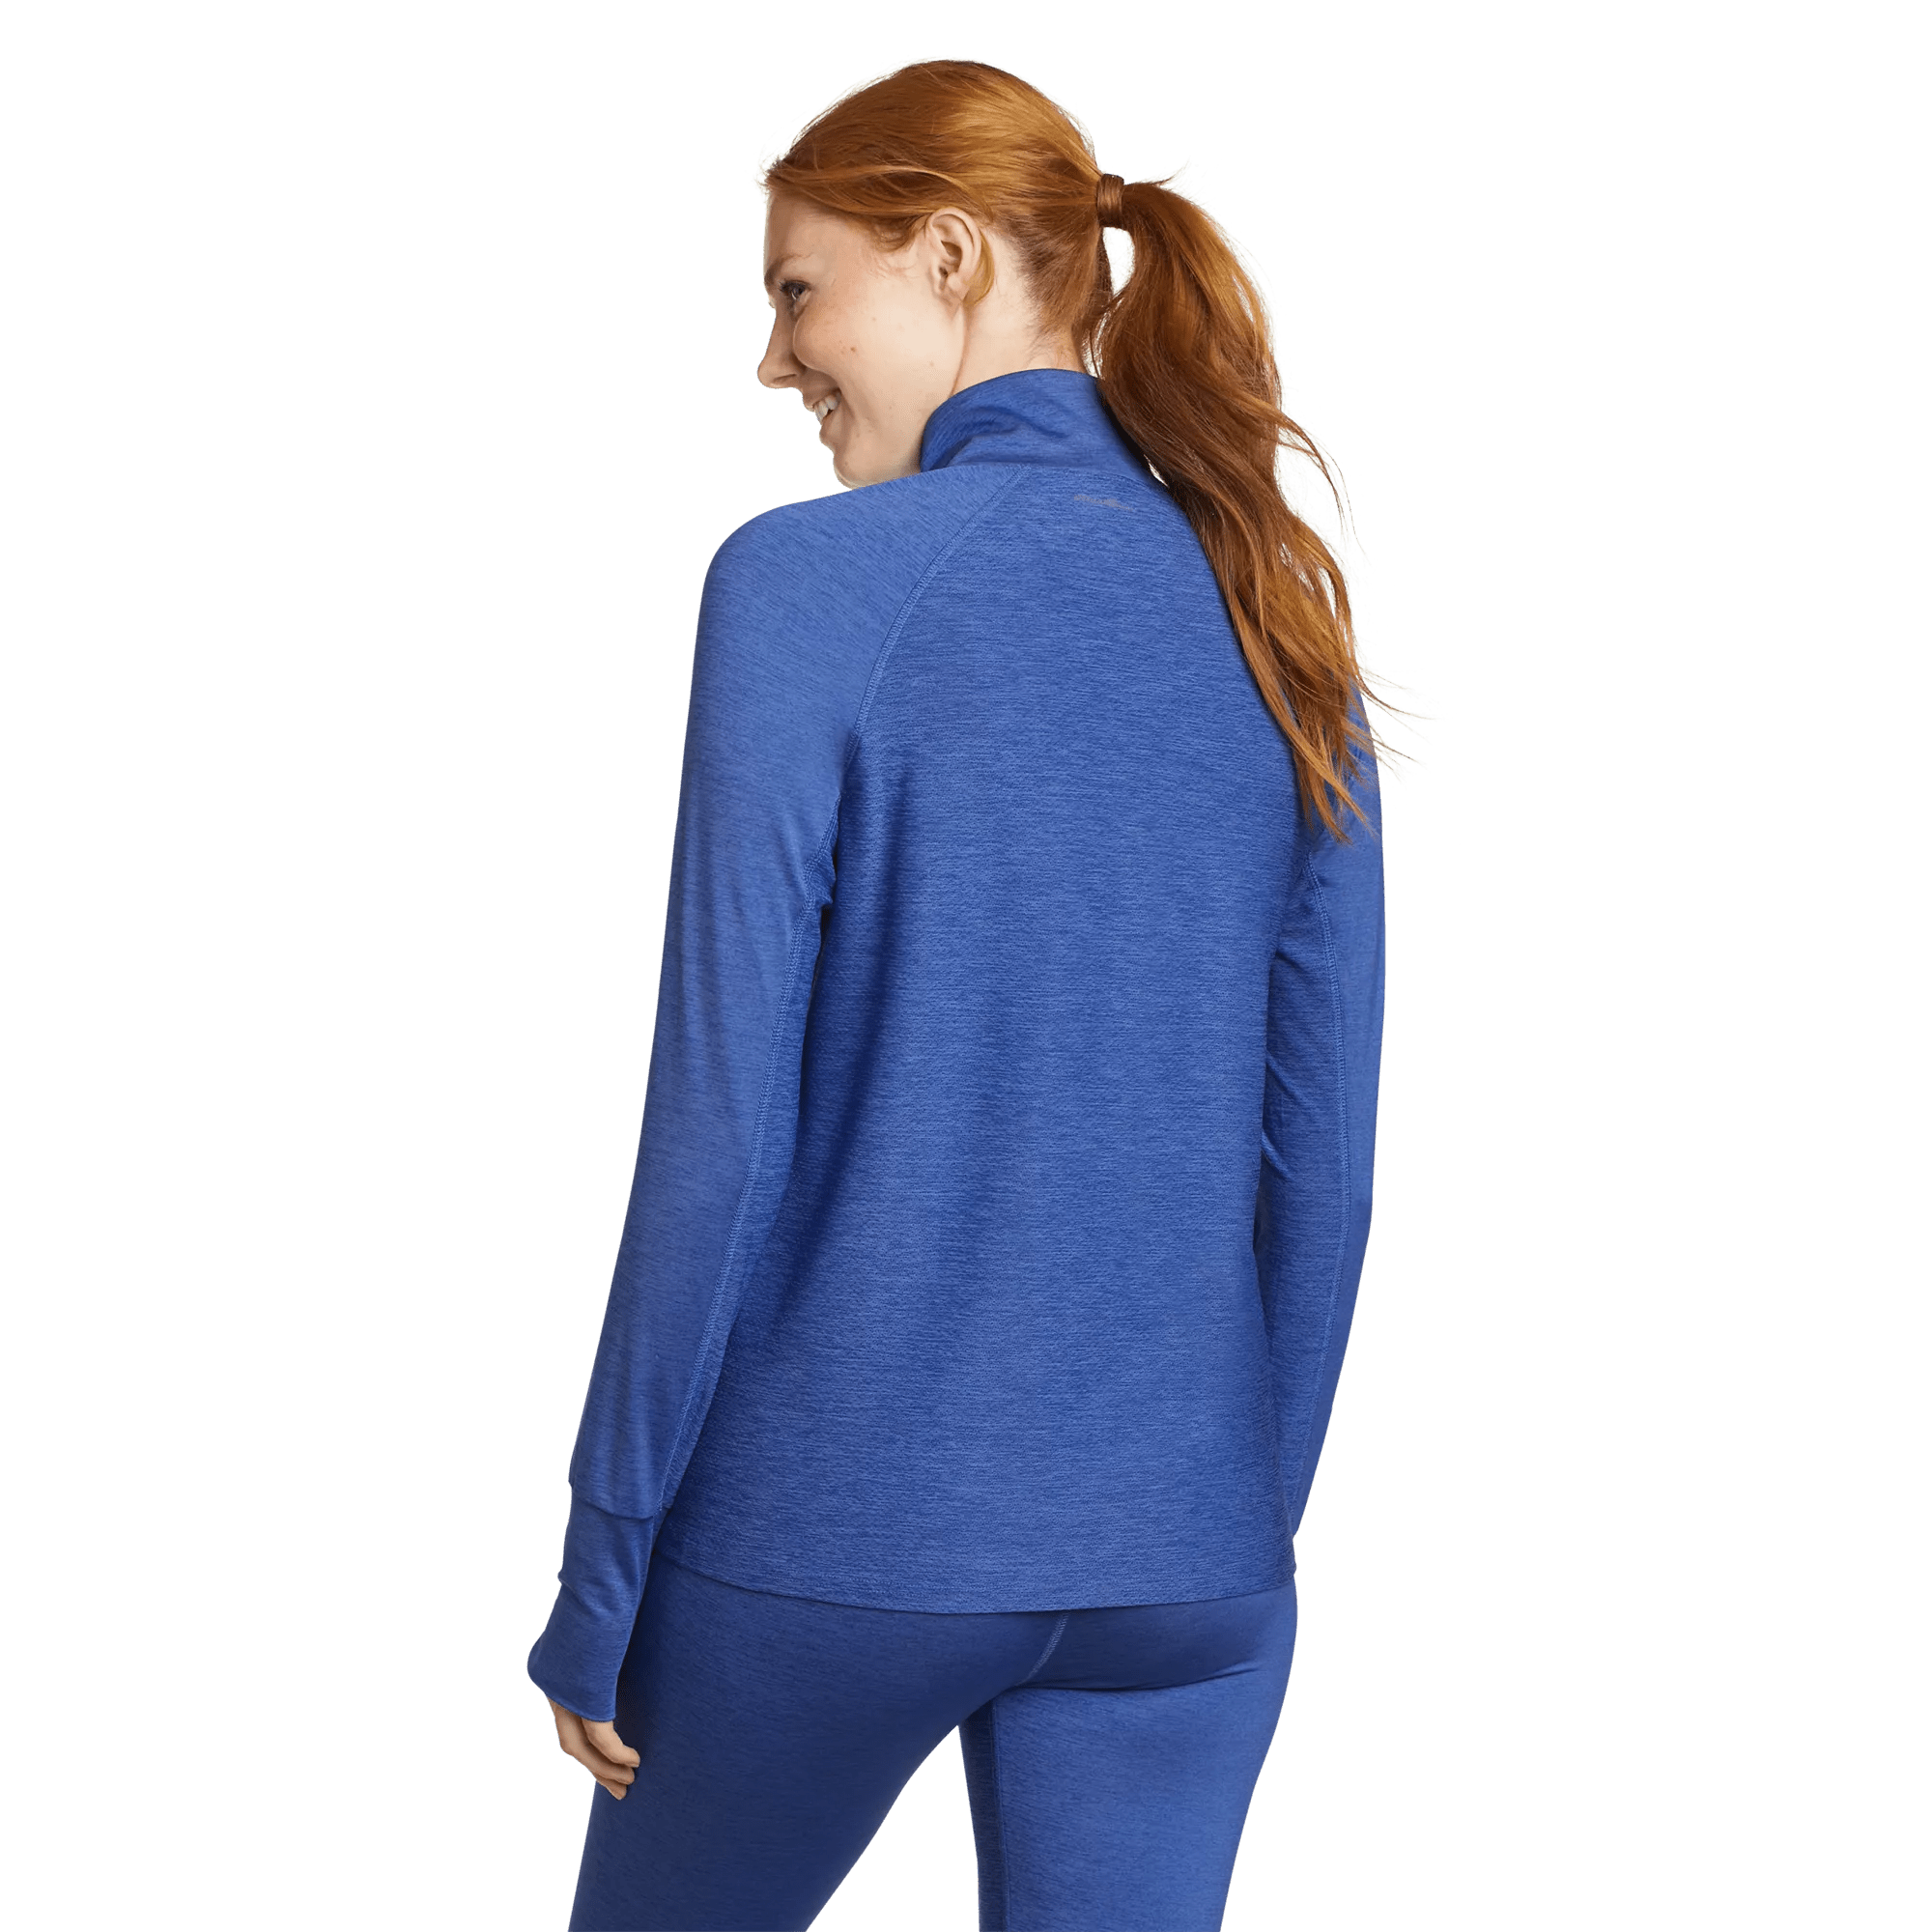 Reso Ascent Baselayer 1/4-Zip